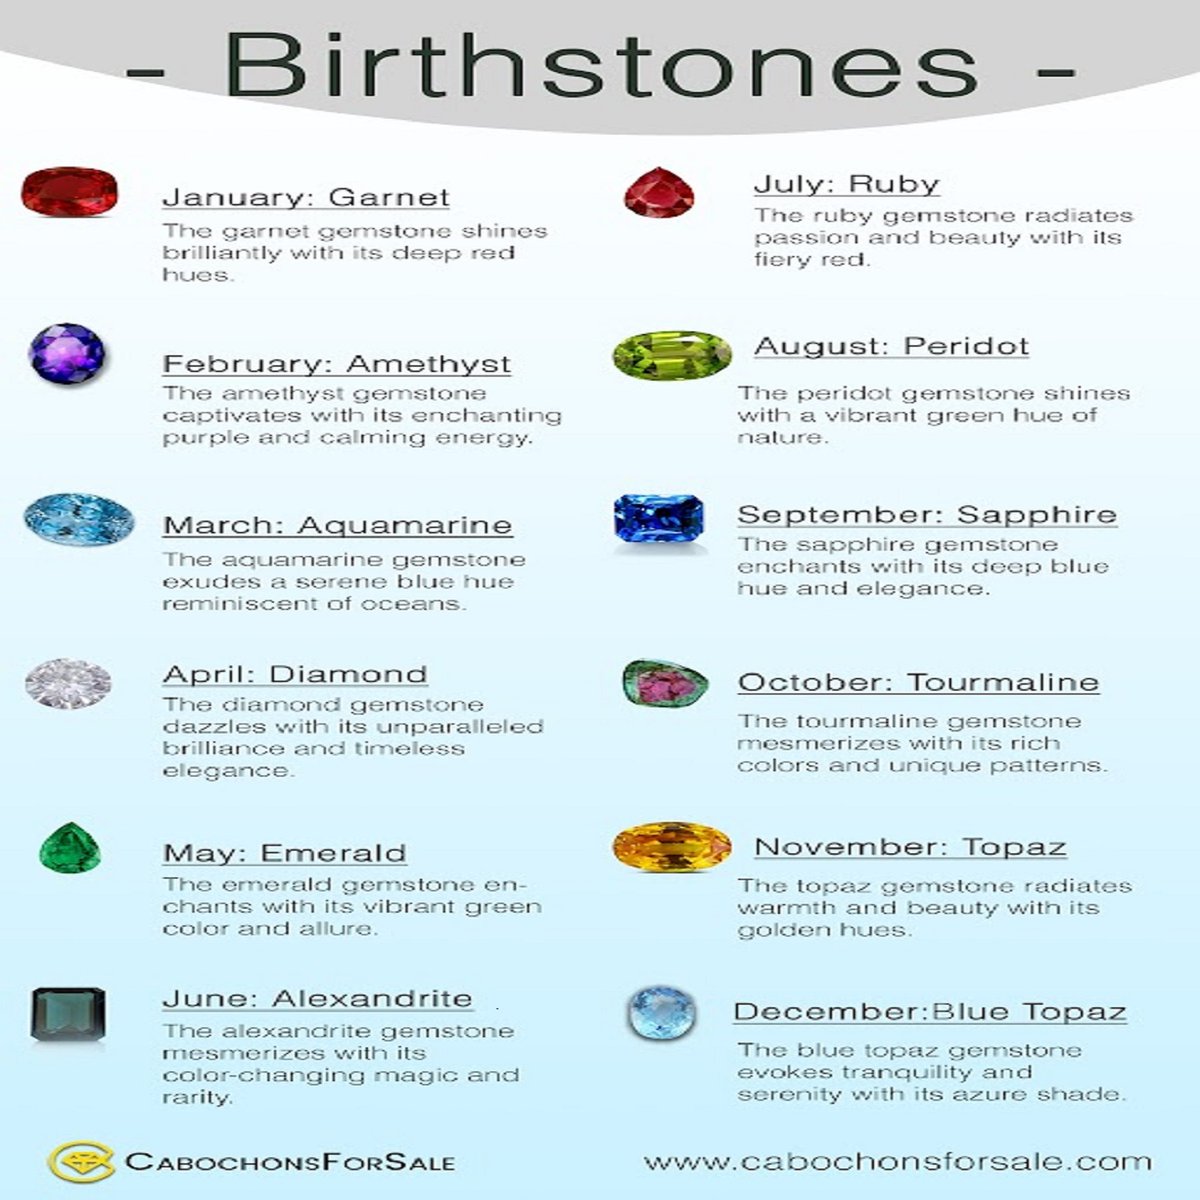 #Birthstones are often used in #jewelry and can be given as thoughtful gifts to celebrate #birthday or other special occasions.
#gemstone #Birthstone #Garnet #Ruby #tourmaline
#Amethyst #Peridot #BlueTopaz
#gemstoneseller #WholesaleGemstone #Onlinegemstoneseller
#Aquamarine